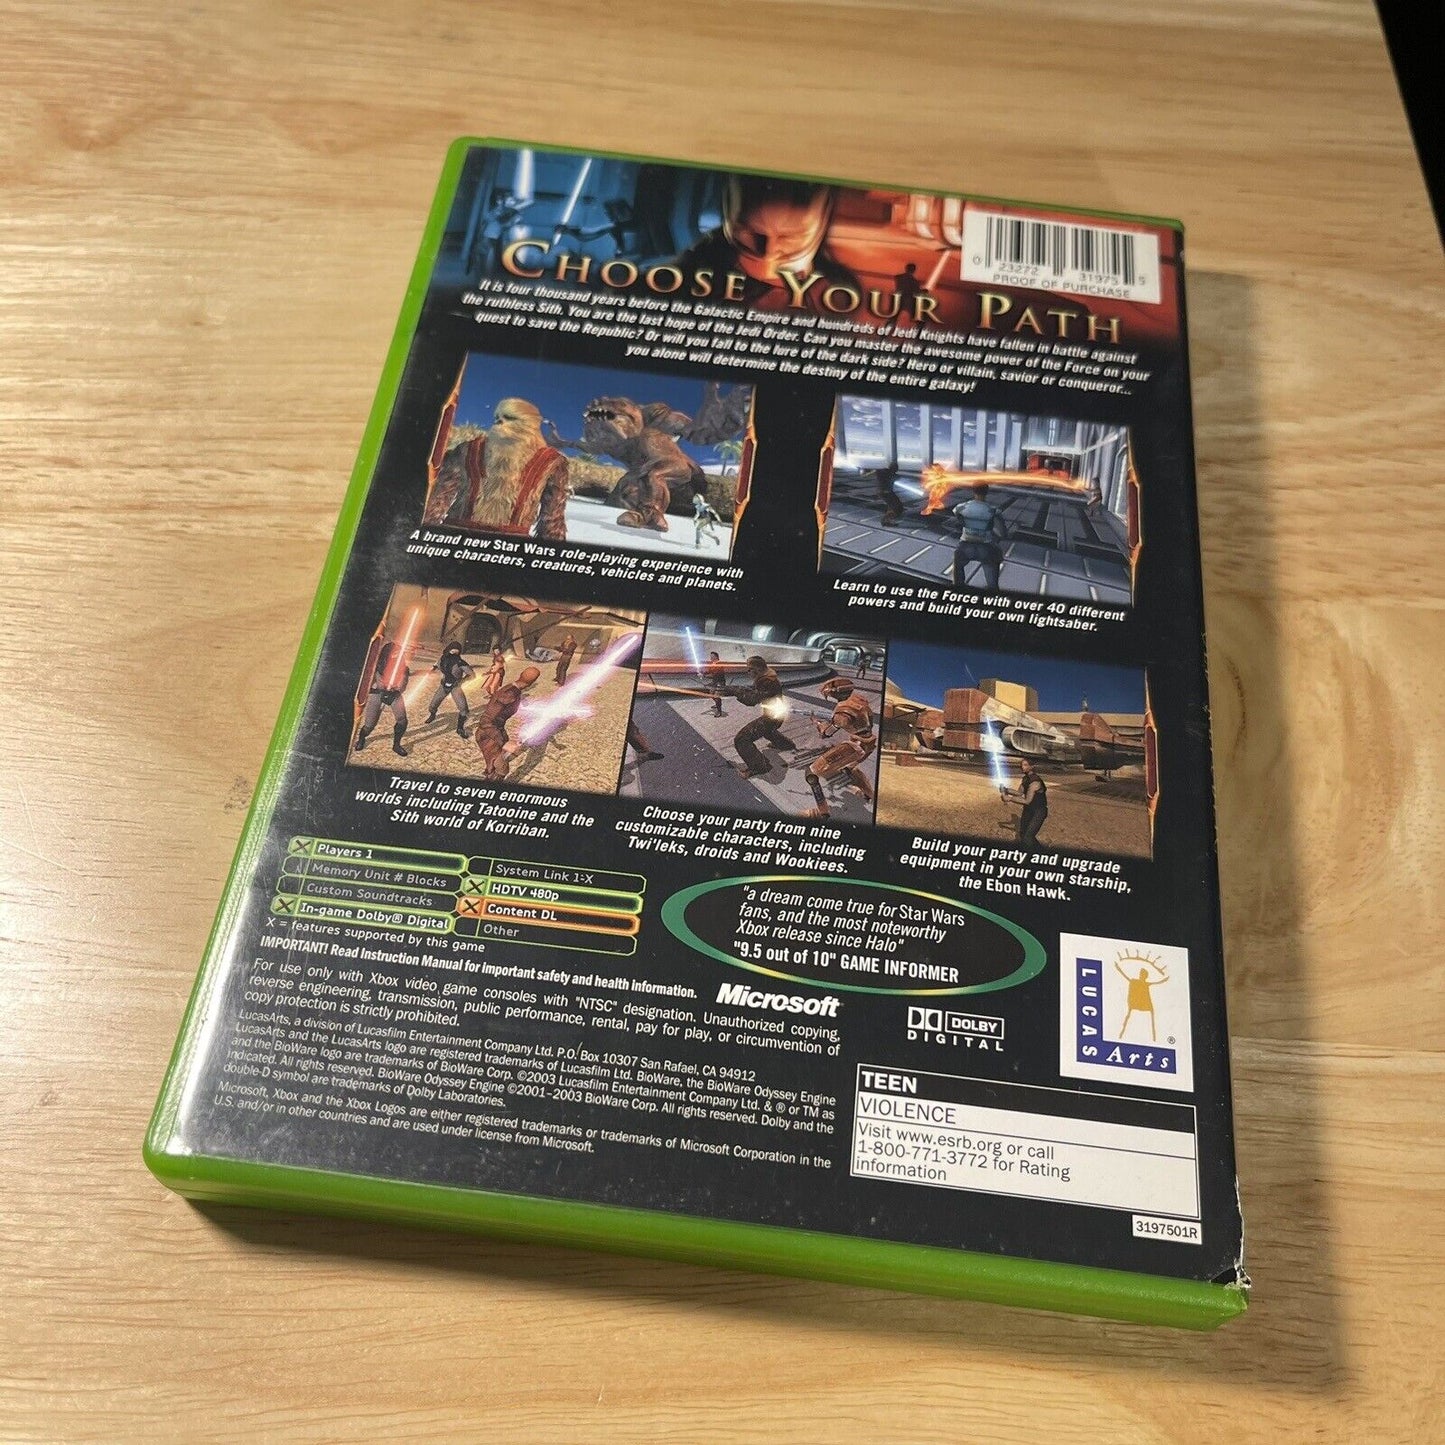 Star Wars: Knights of the Old Republic (Microsoft Xbox, 2003)